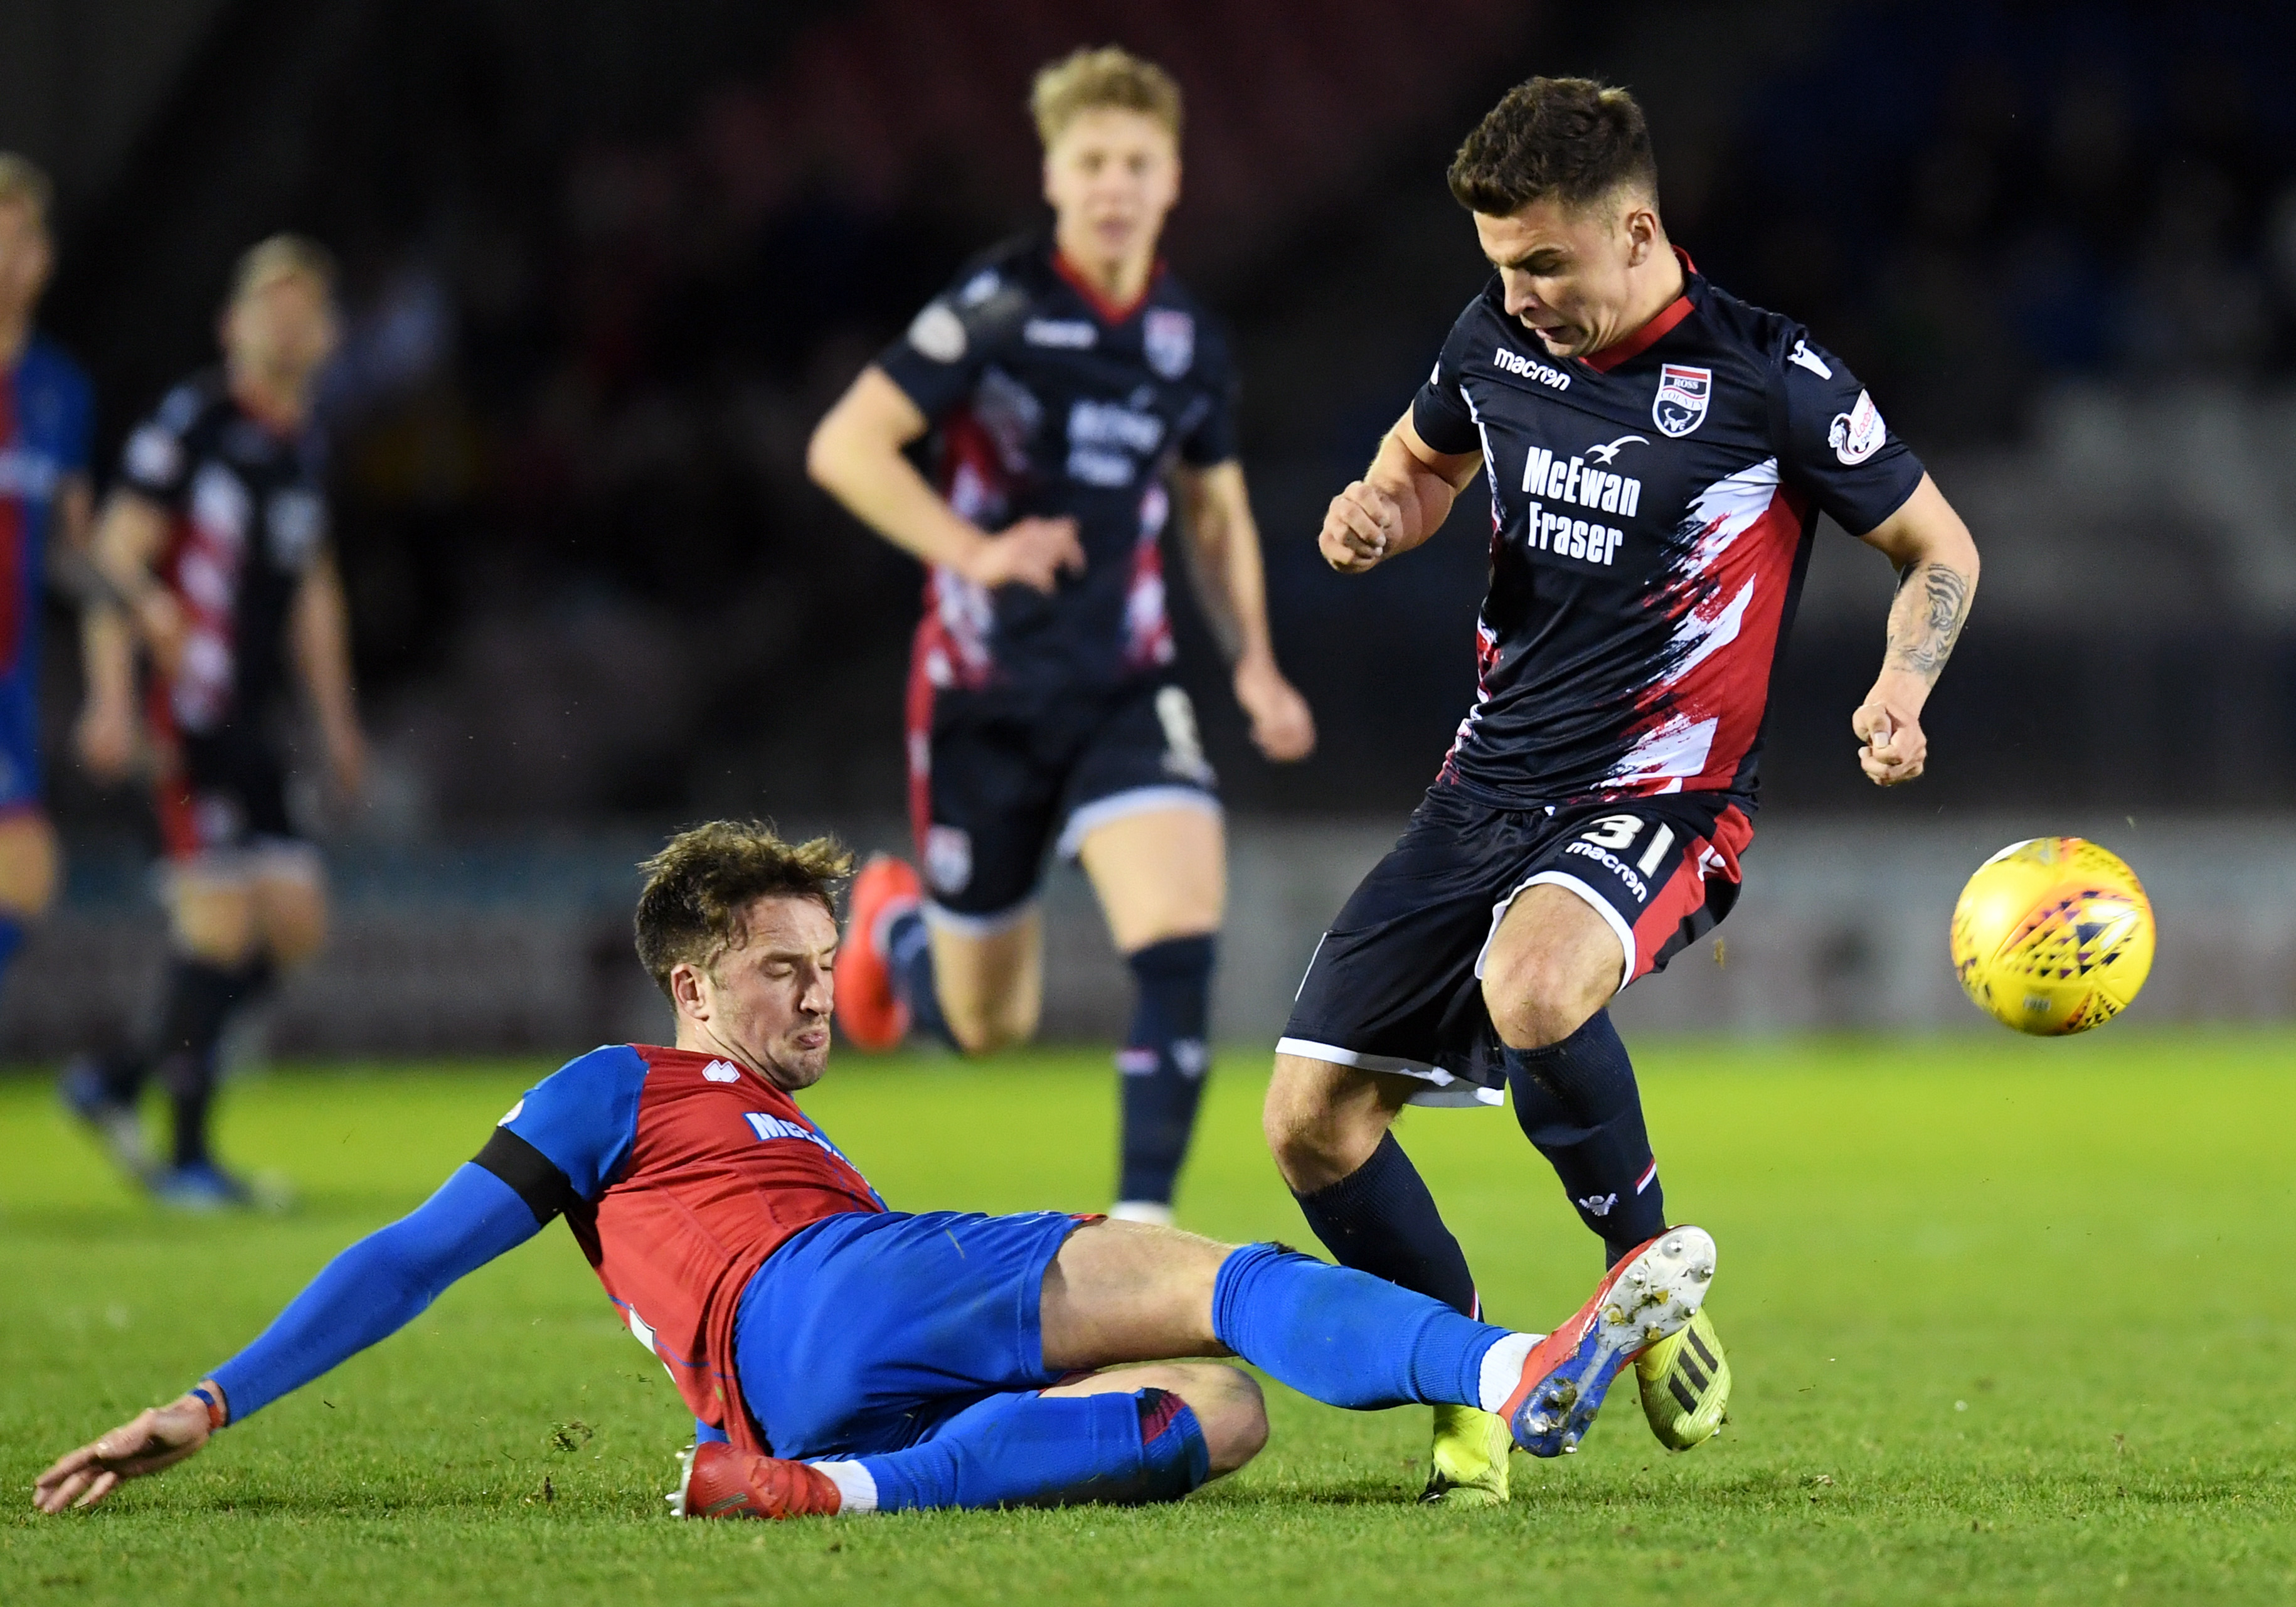 02/03/19 LADBROKES CHAMPIONSHIP
INVERNESS CT V ROSS COUNTY
TULLOCH CALEDONIAN STADIUM - INVERNESS
Inverness’ Brad McKay tackles Ross County’s Daniel Armstrong